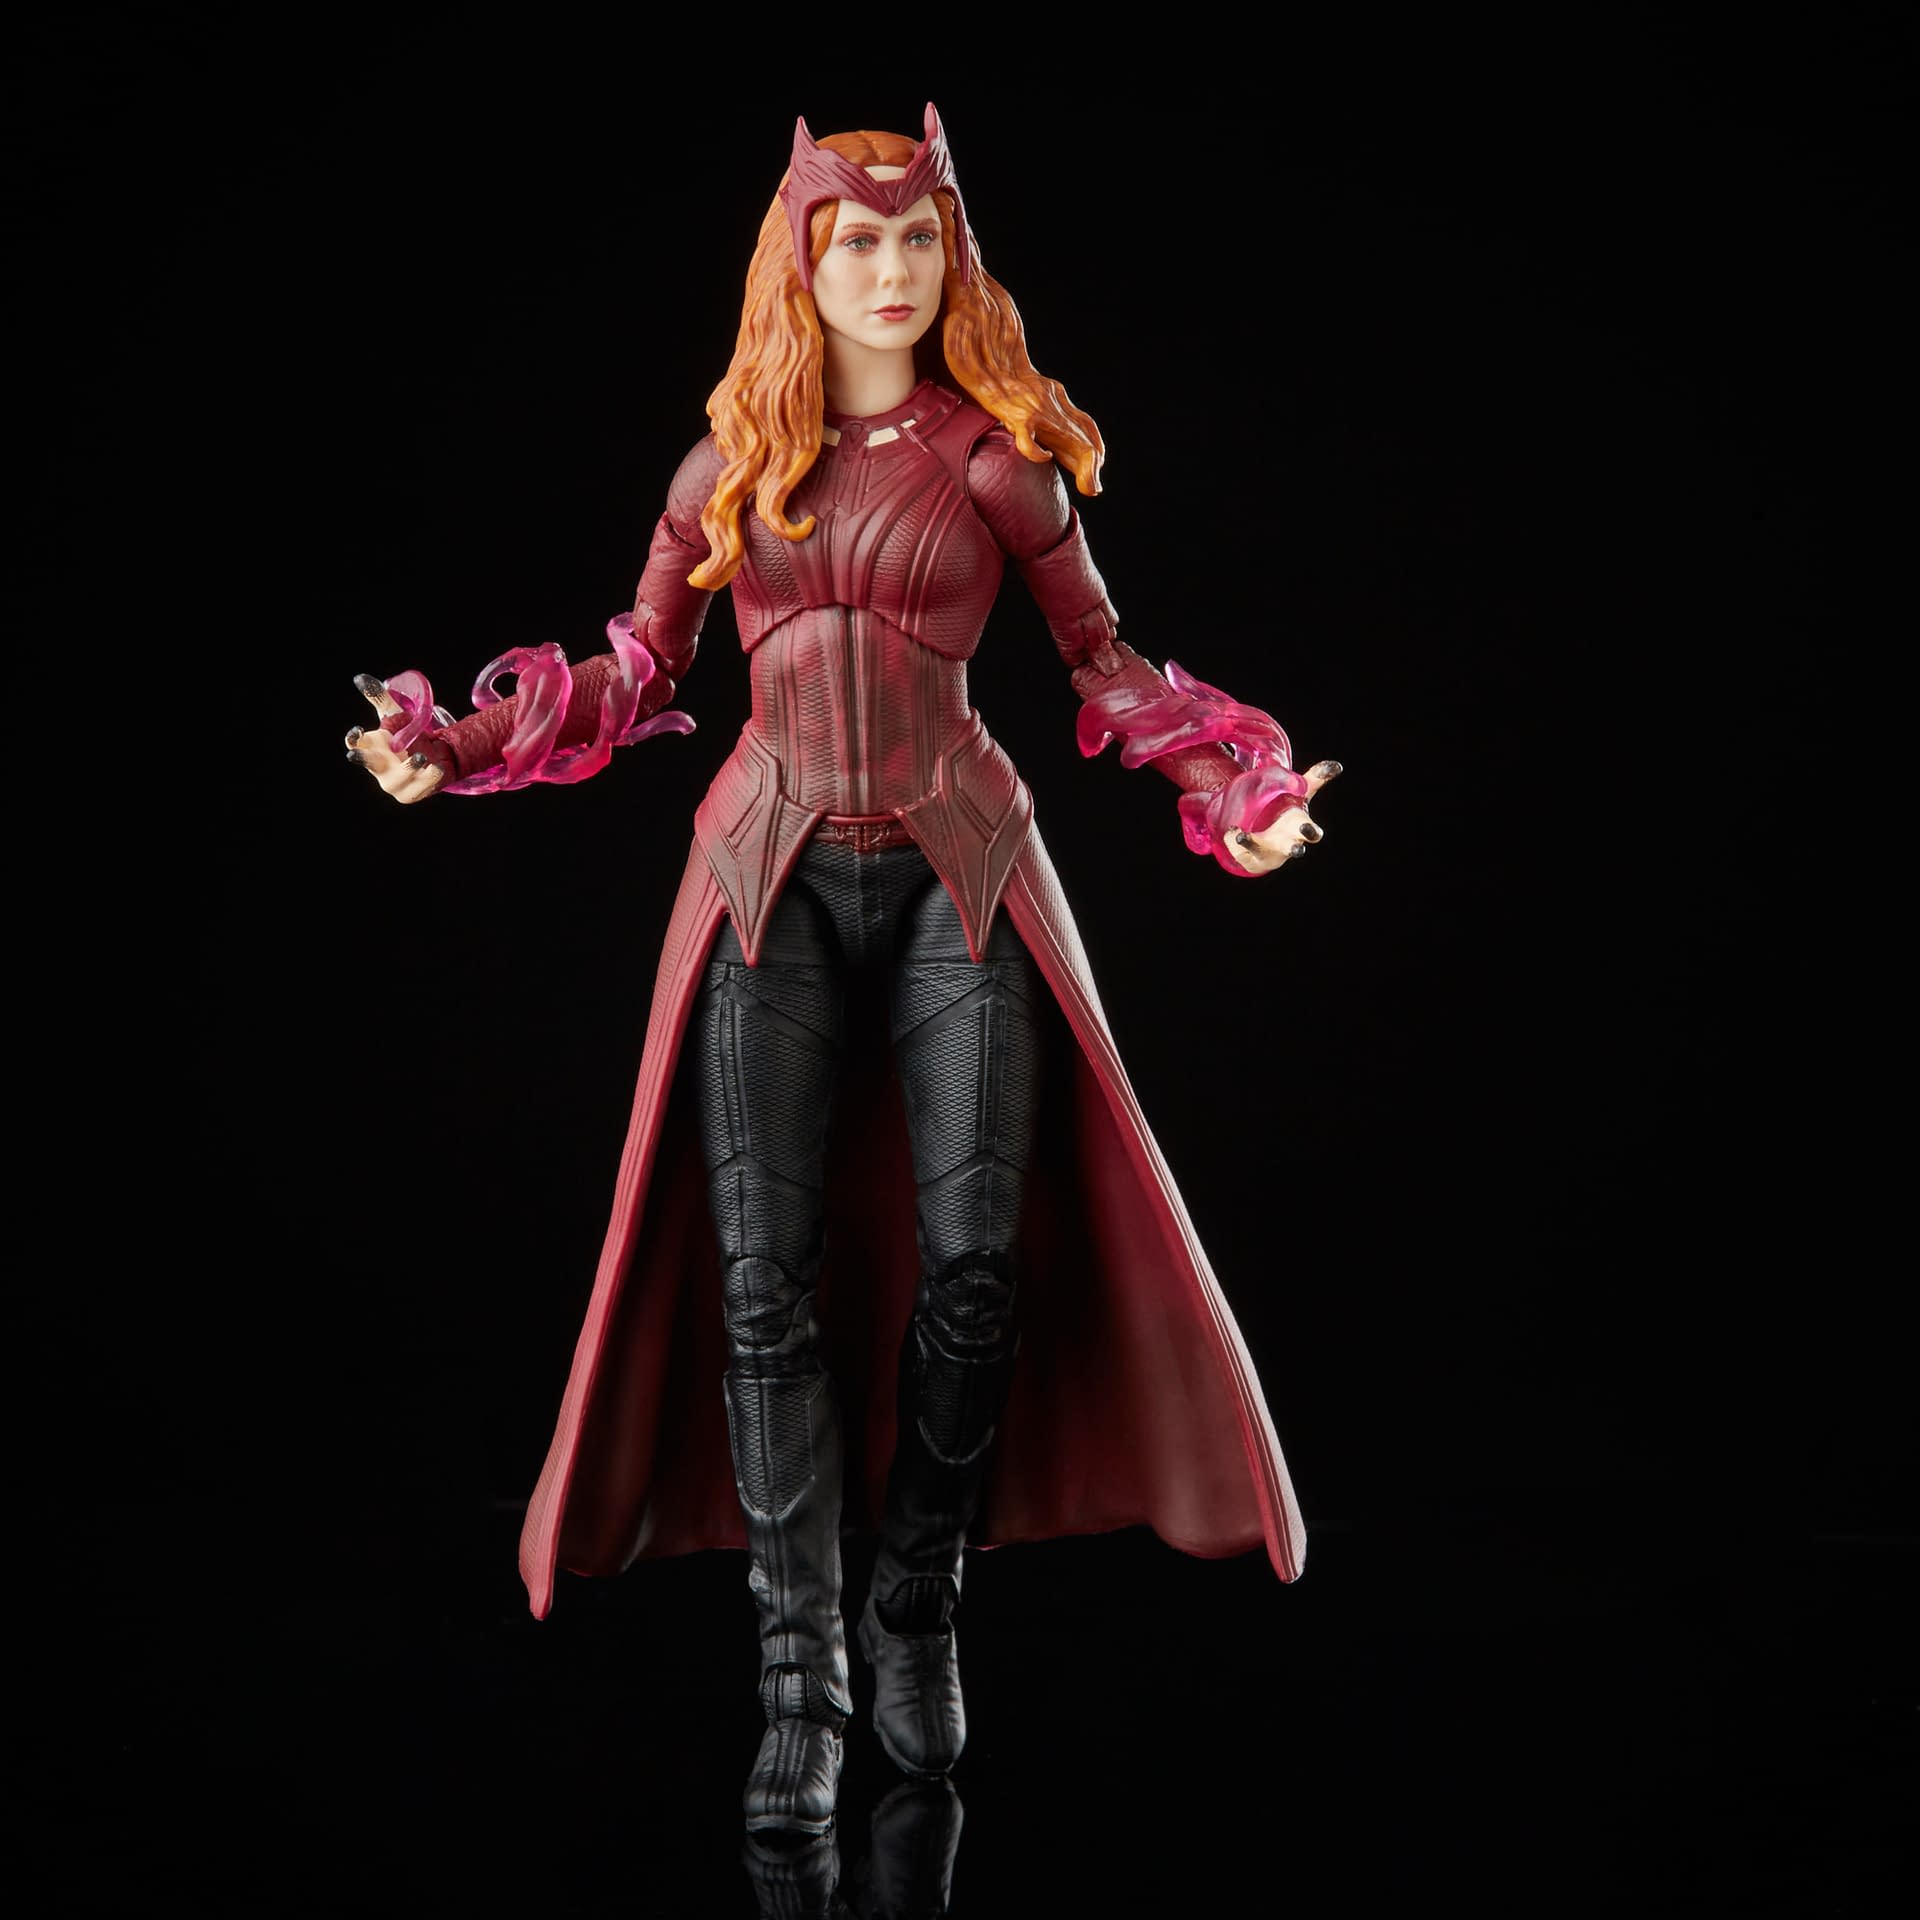 Return to the Multiverse of Madness with Marvel Legends Scarlet Witch